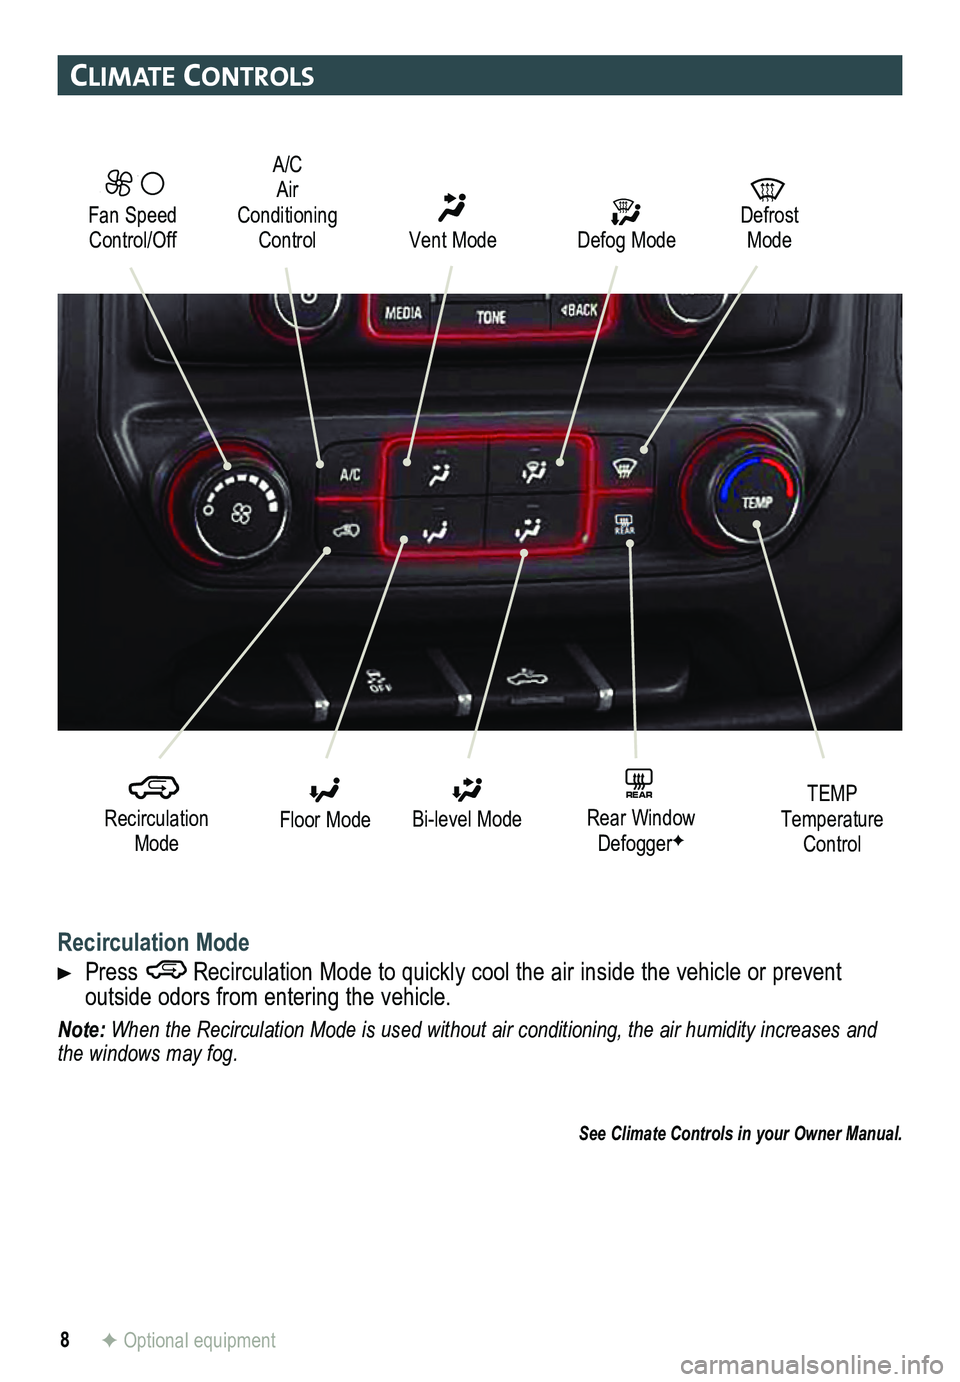 GMC SIERRA HD 2015  Get To Know Guide 8
clImate controls
Recirculation Mode
 Press Recirculation Mode to quickly cool the air inside the vehicle or prevent  
outside odors from entering the vehicle. 
Note: When the Recirculation Mode is u